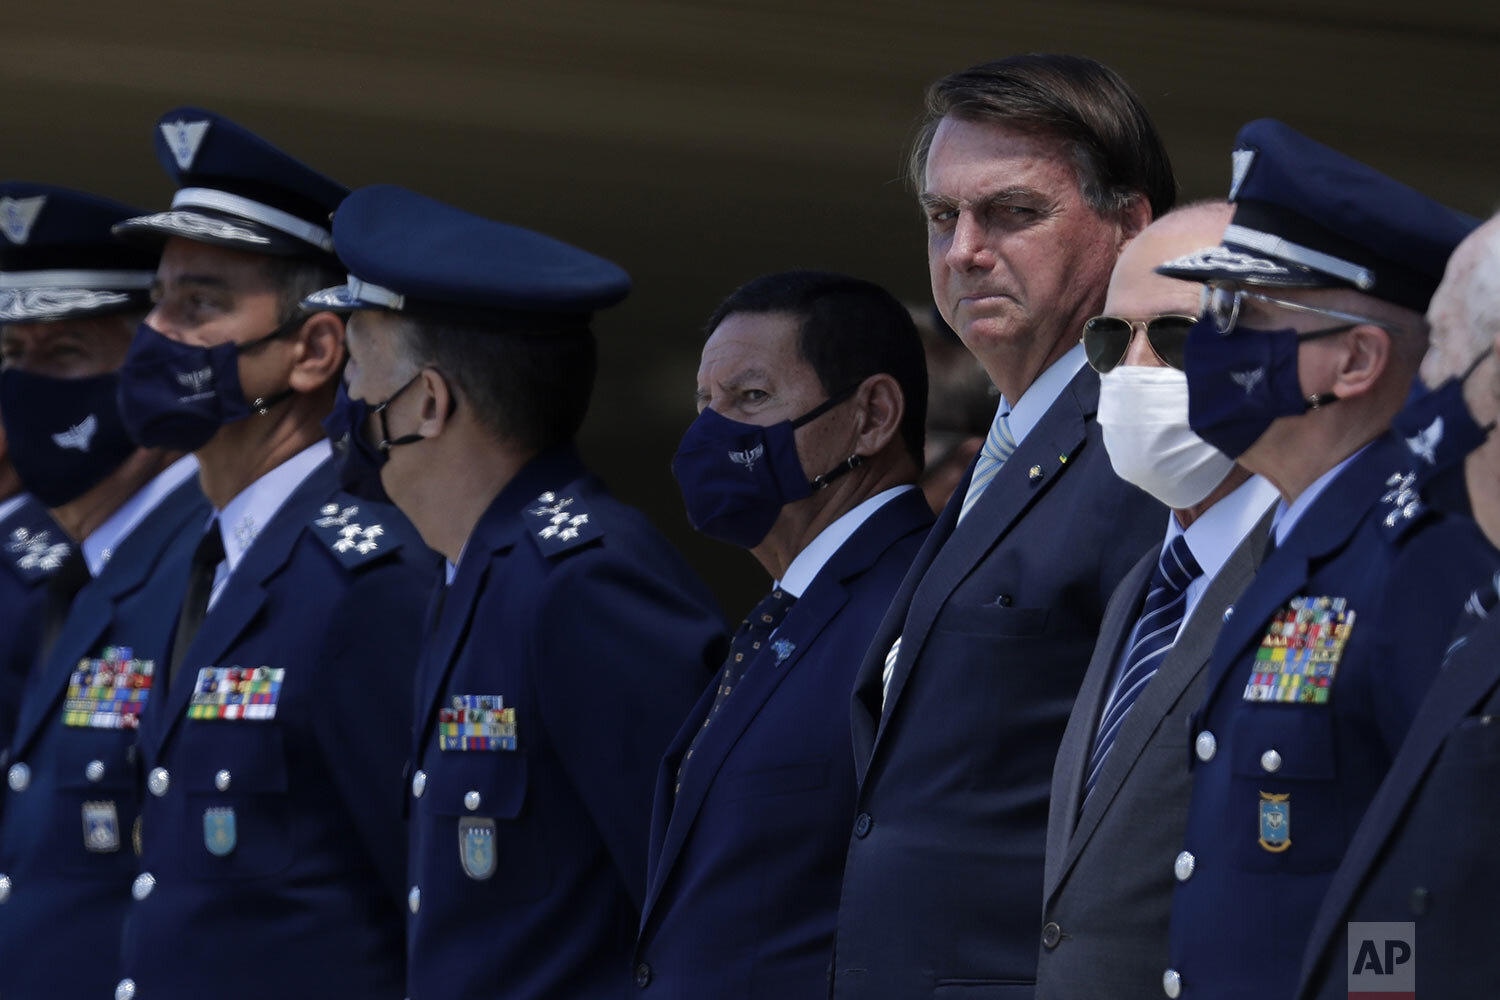  Brazil's President Jair Bolsonaro, fourth from right, flanked by Vice President Hamilton Mourao, left, and Defense Minister Fernando Azevedo, attend a ceremony for the Air Force’s 80th anniversary in Brasilia, Brazil, Jan. 20, 2021. (AP Photo/Eraldo